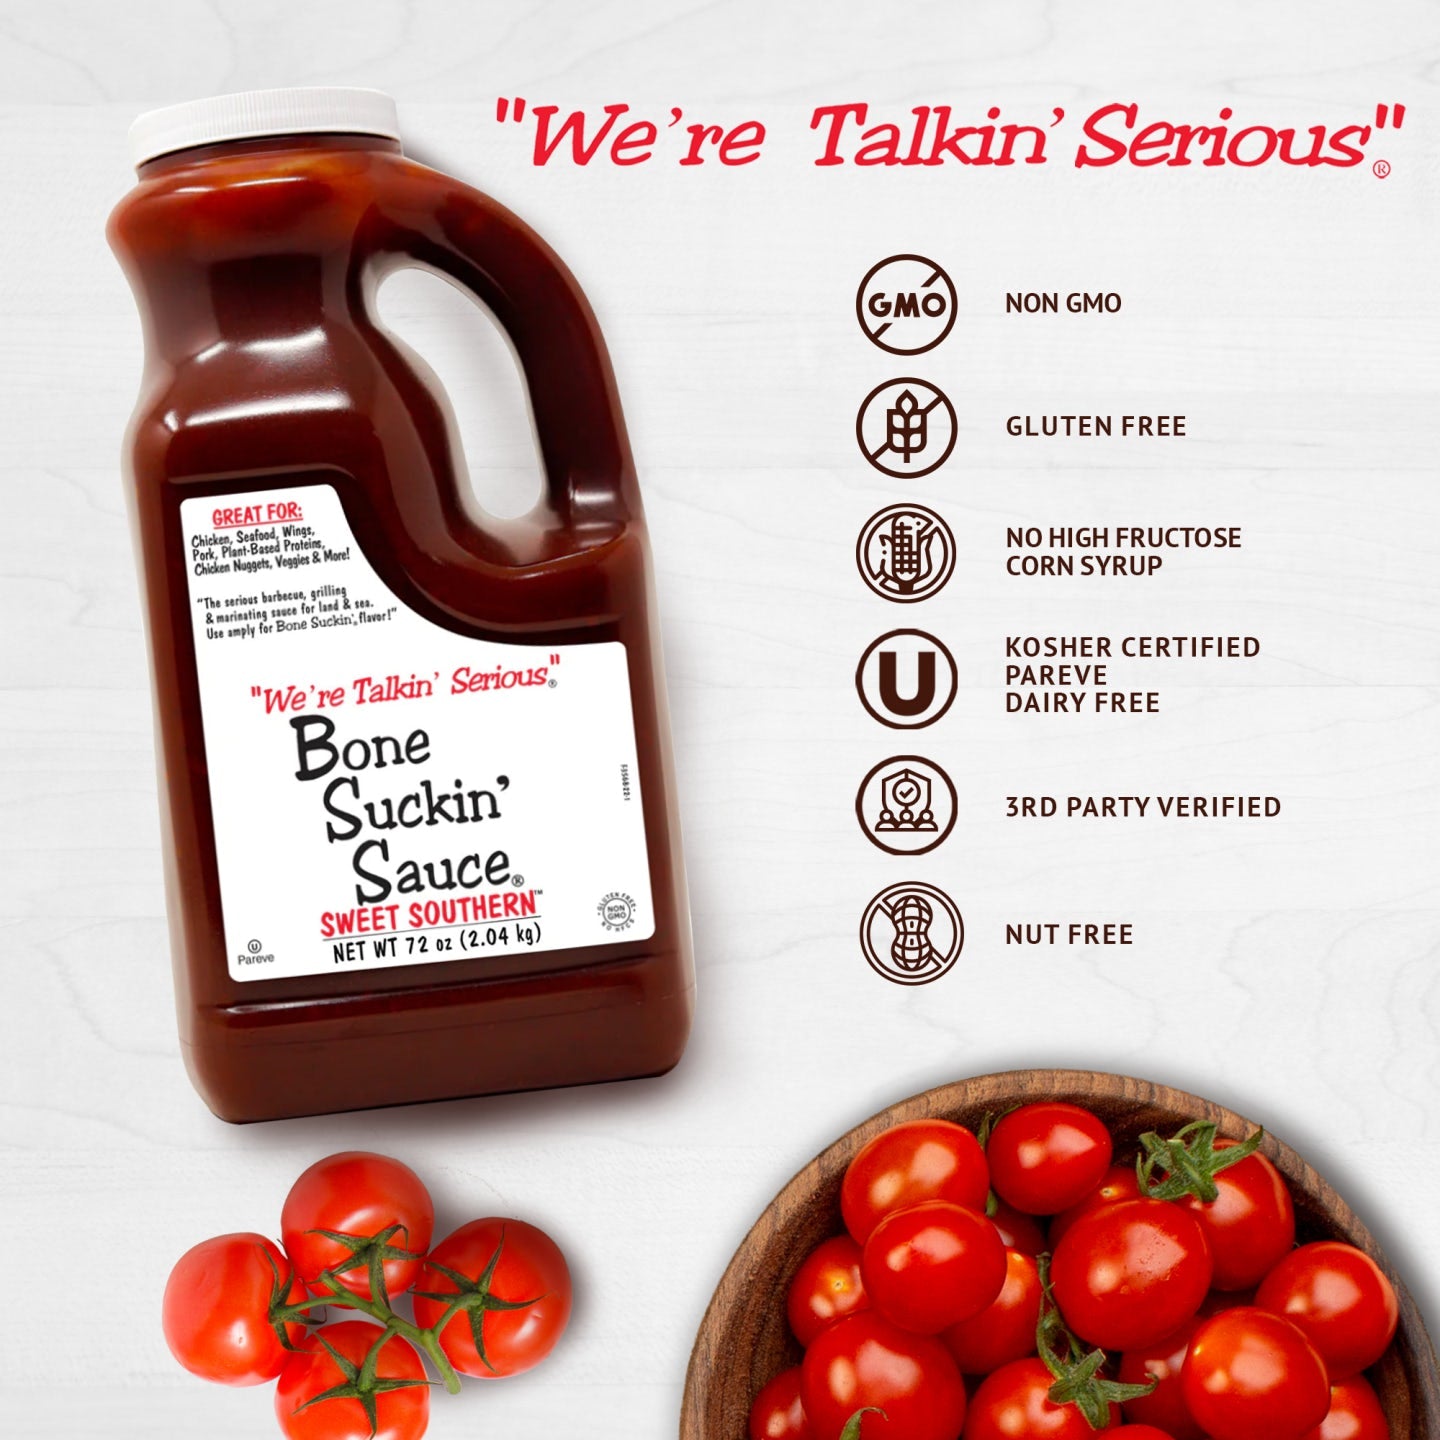 Bone Suckin' Sauce®, Sweet Southern® 72 oz. Based on our award winning family recipe, our Bone Suckin’ Sauce®, Sweet Southern™ is Non GMO, gluten free, No high fructose corn syrup, kosher certified, pareve dairy free, 3rd party verified, and nut free.